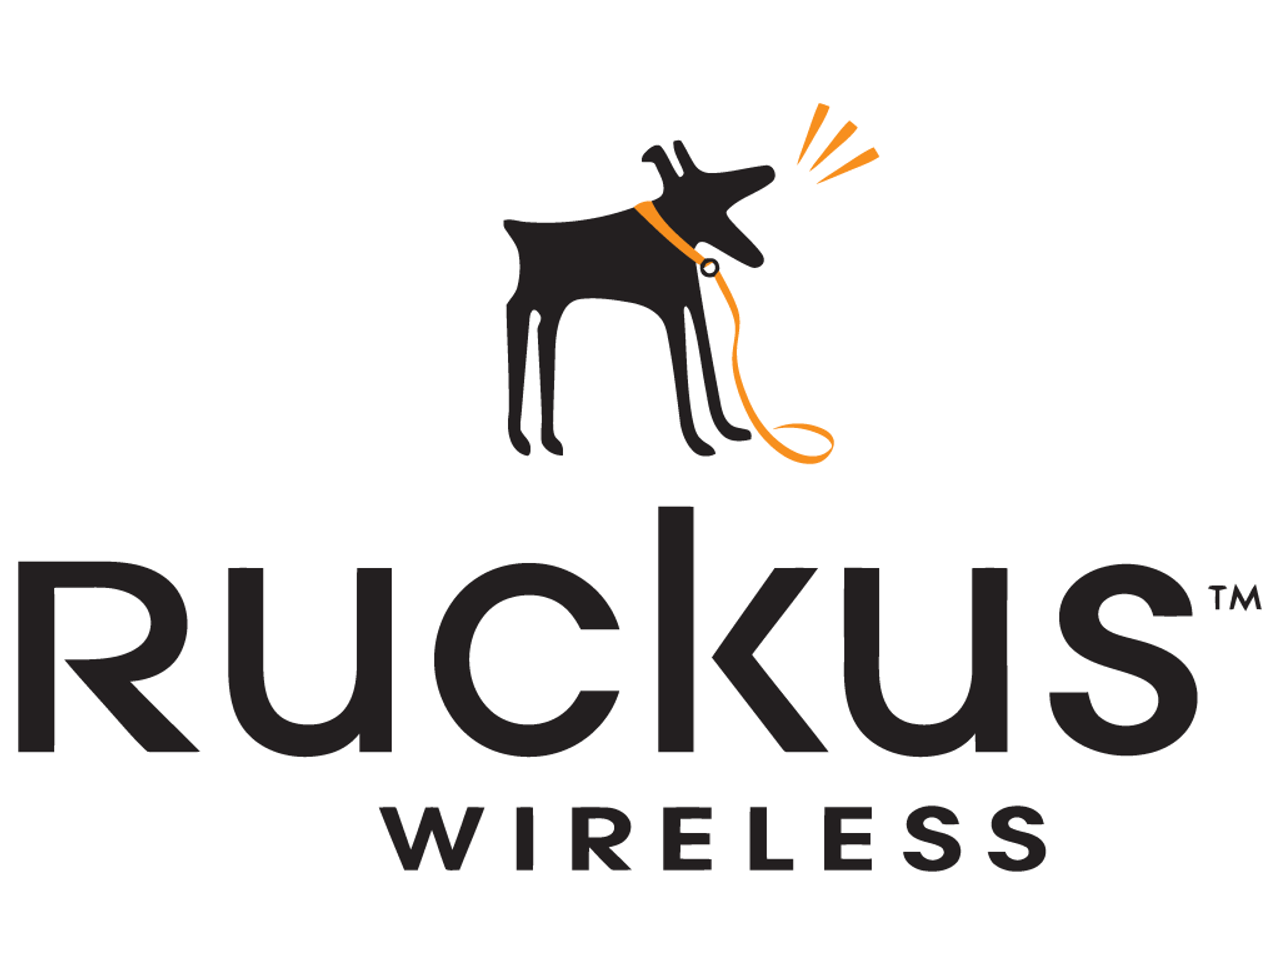 Ruckus Planner new software supporting 11AC APs, powered by AirMagnet. RF Planner with Ruckus antenna patterns to assist partners for pre-deployment estimates.